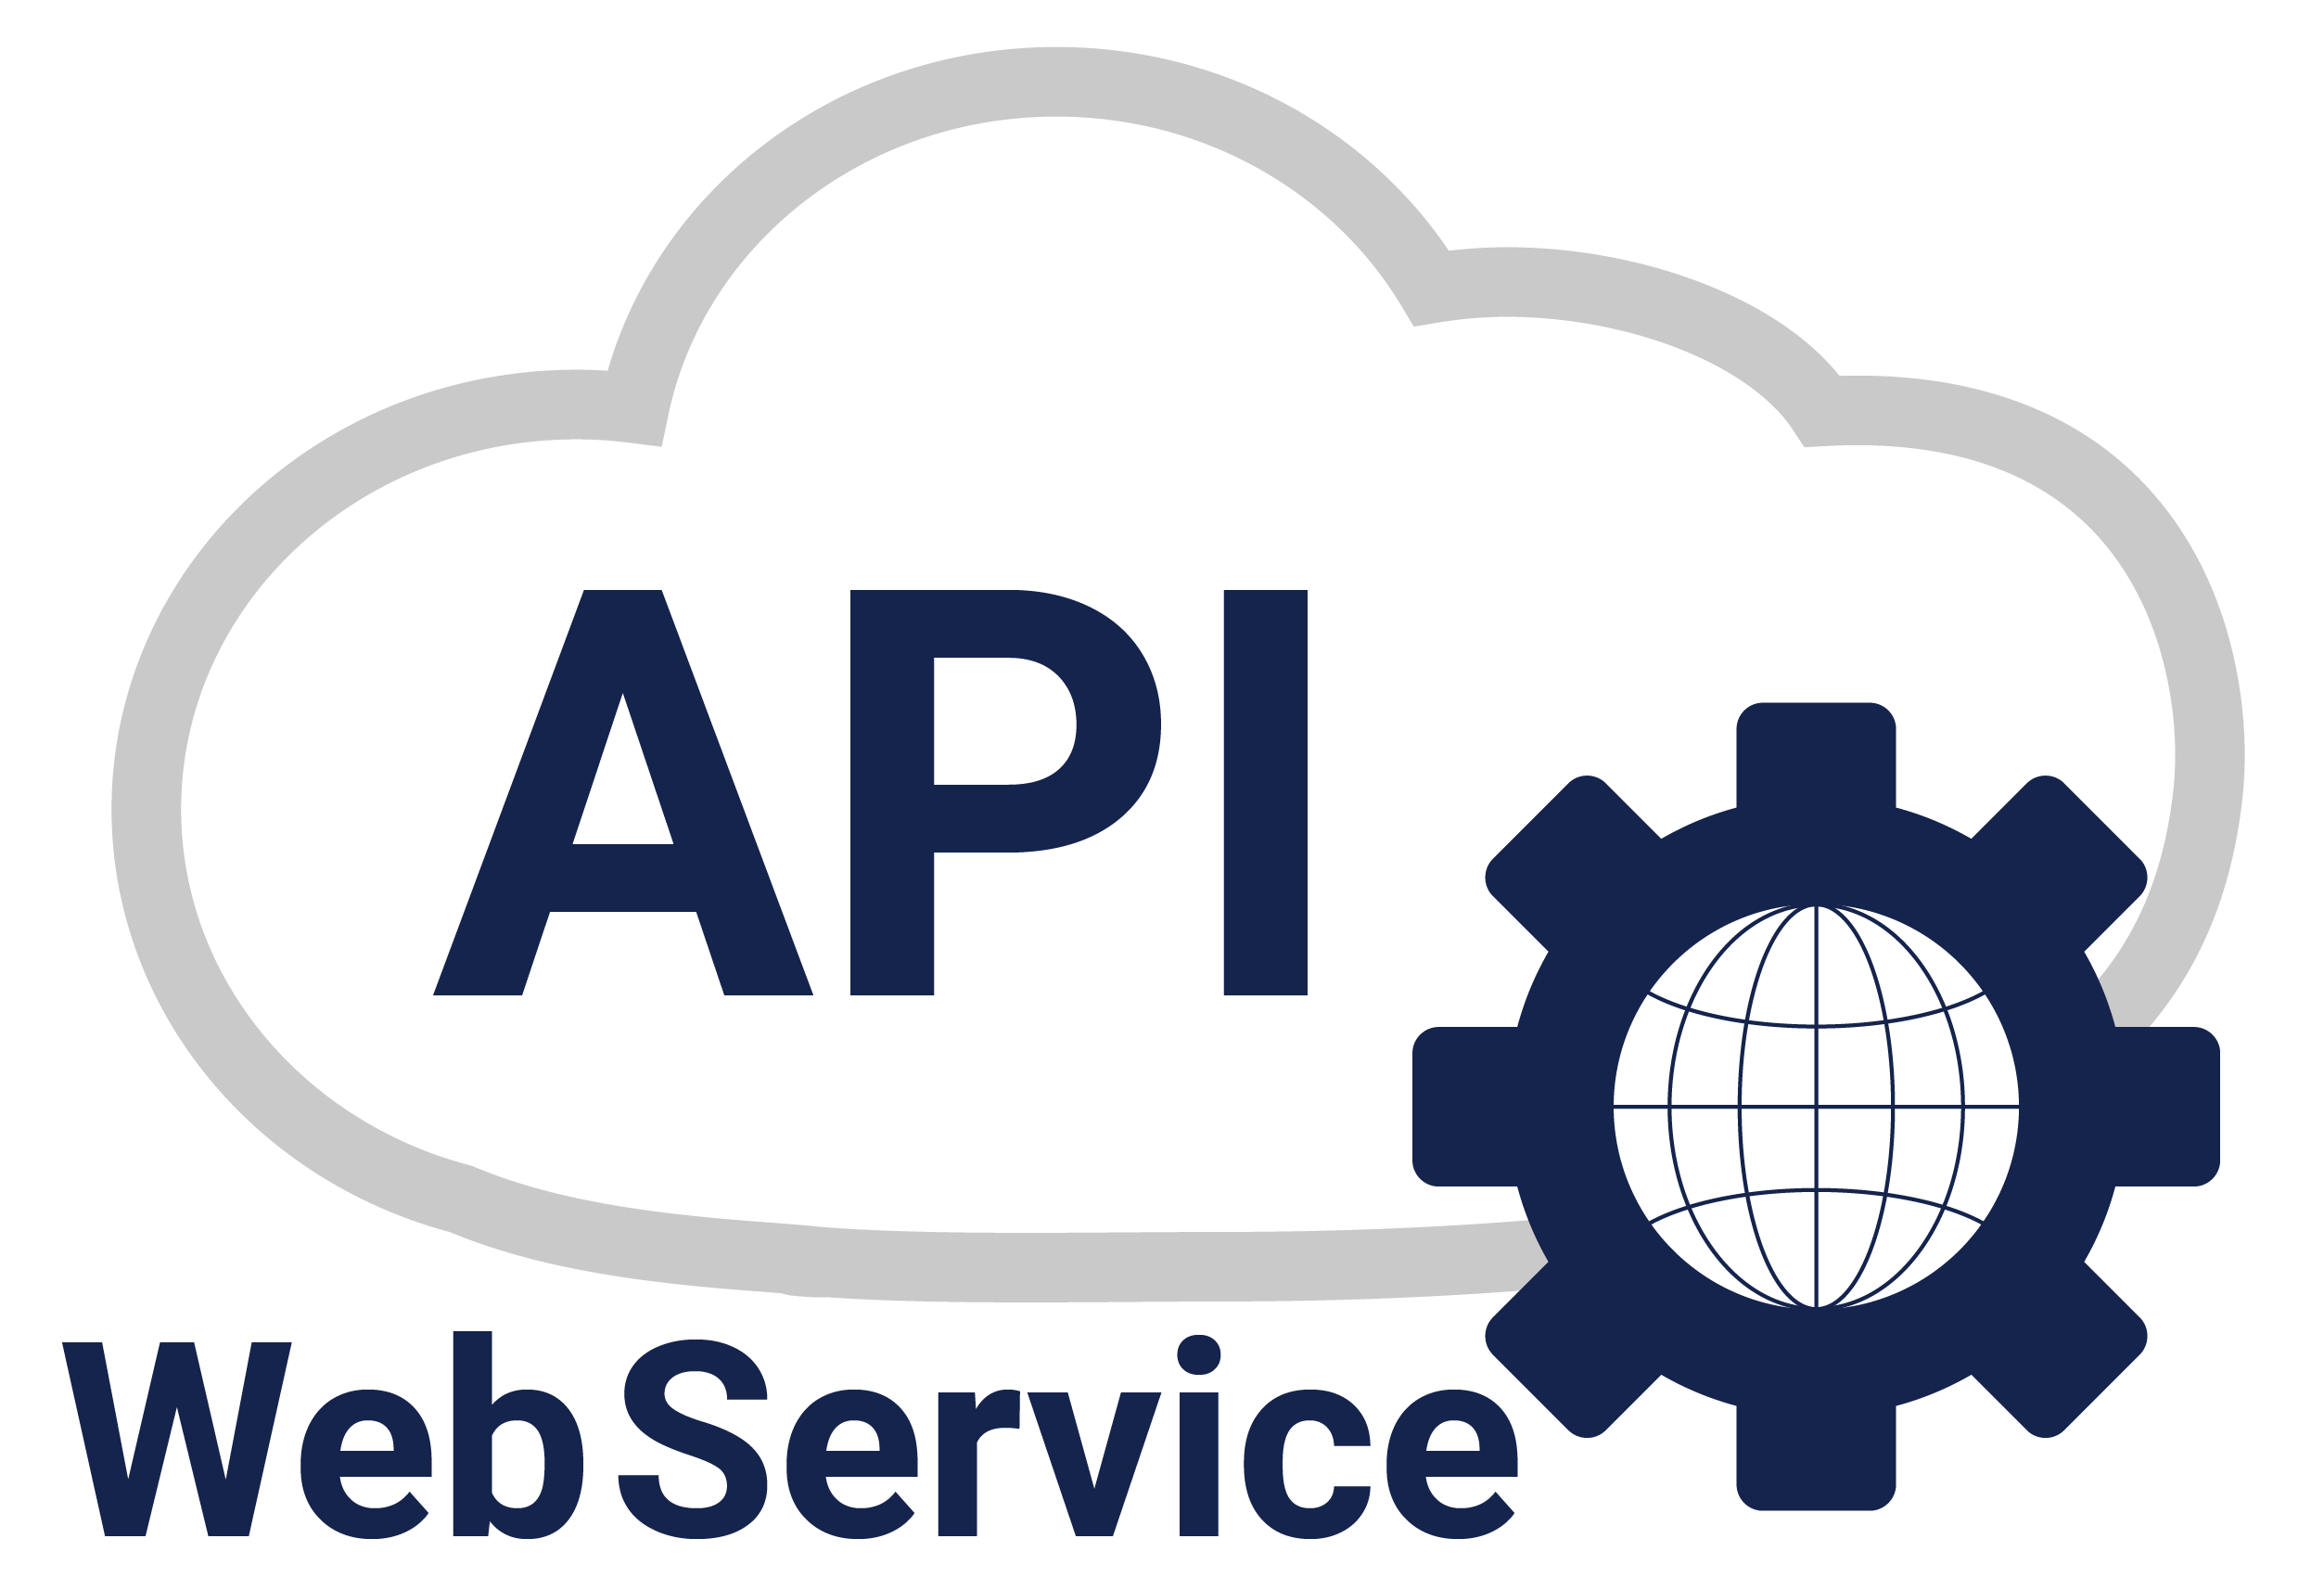 Web services reduce processing time and manual data entry, and provide a dependable and secure connection between insurance carriers and government agencies.